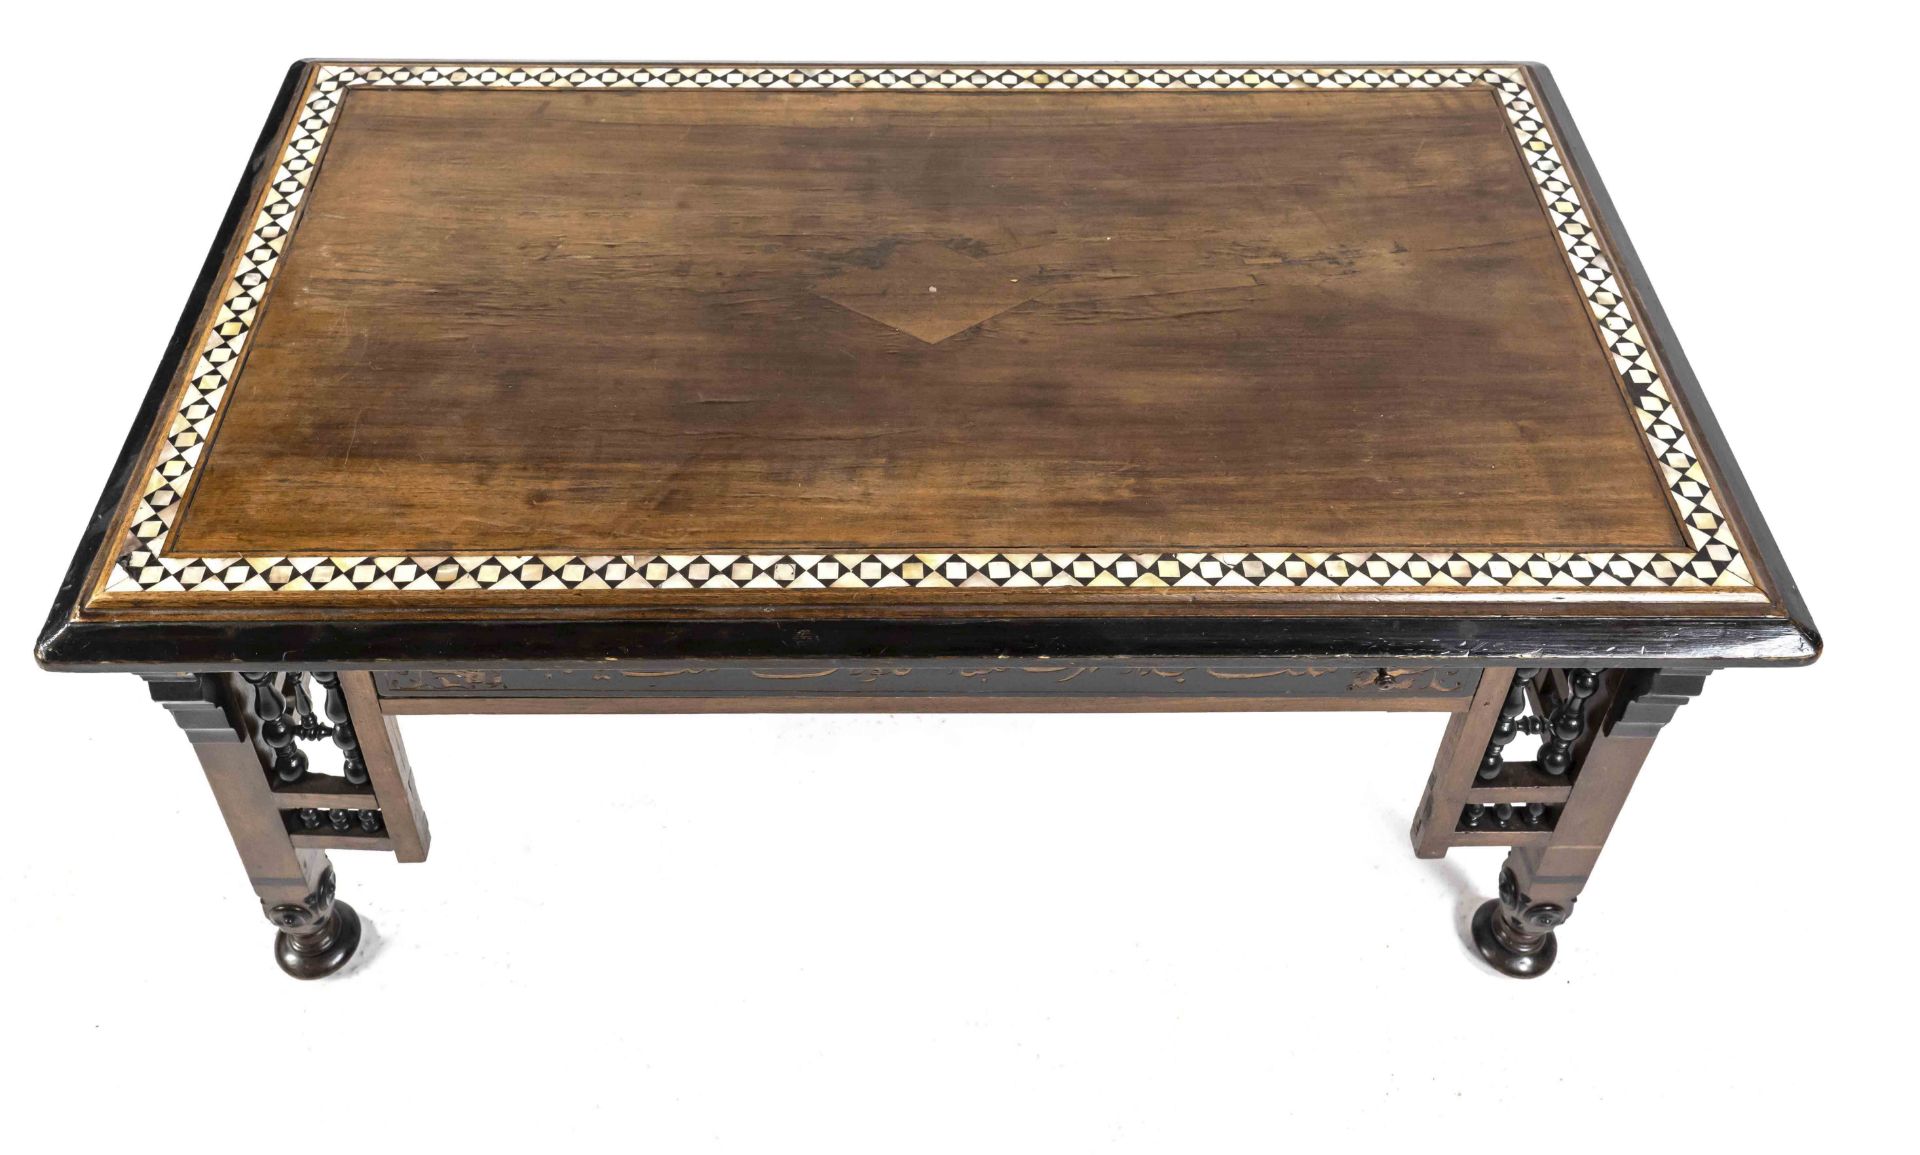 Oriental coffee table with mother-of-pearl inlays, circa 1900, walnut, partially ebonized, - Image 2 of 2